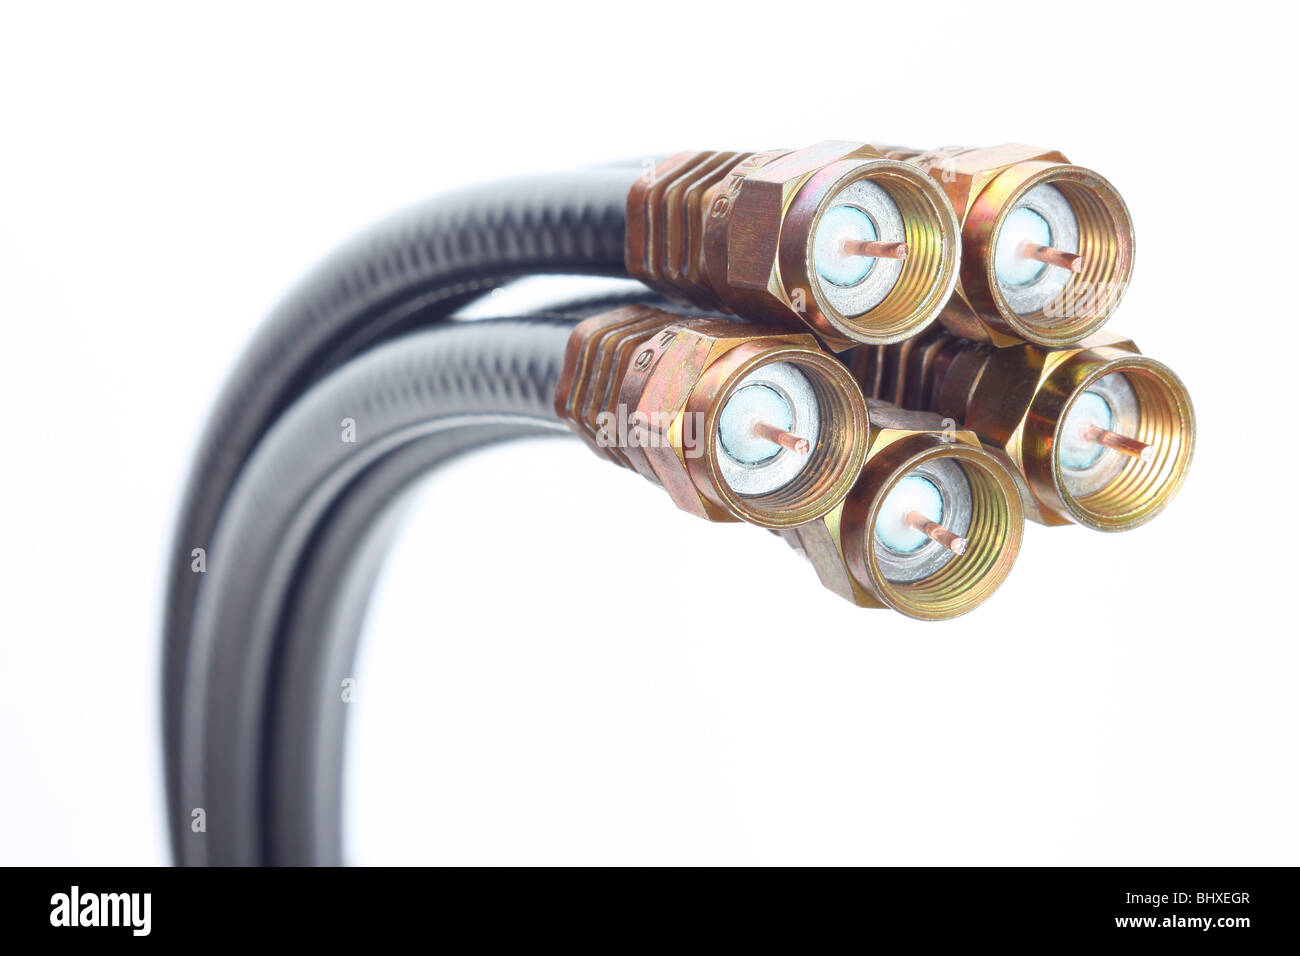 Professional cable tv connectors Stock Photo